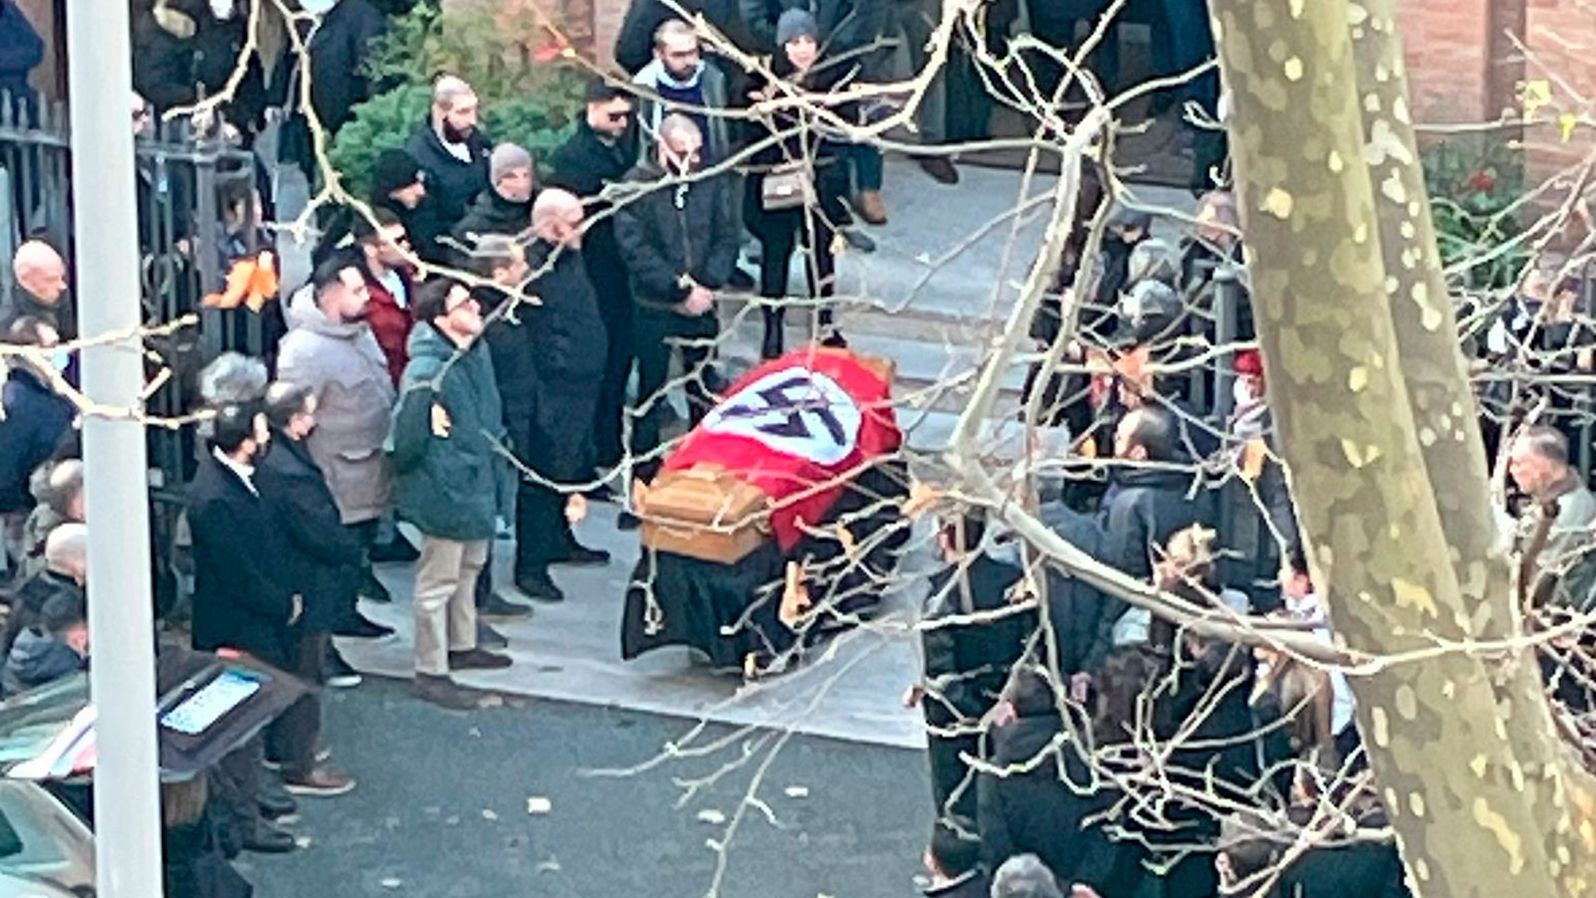 A picture made available by the Italian online news portal Open shows people gathered around a swastika-covered casket outside the St. Lucia church in Rome, Italy, on Monday.